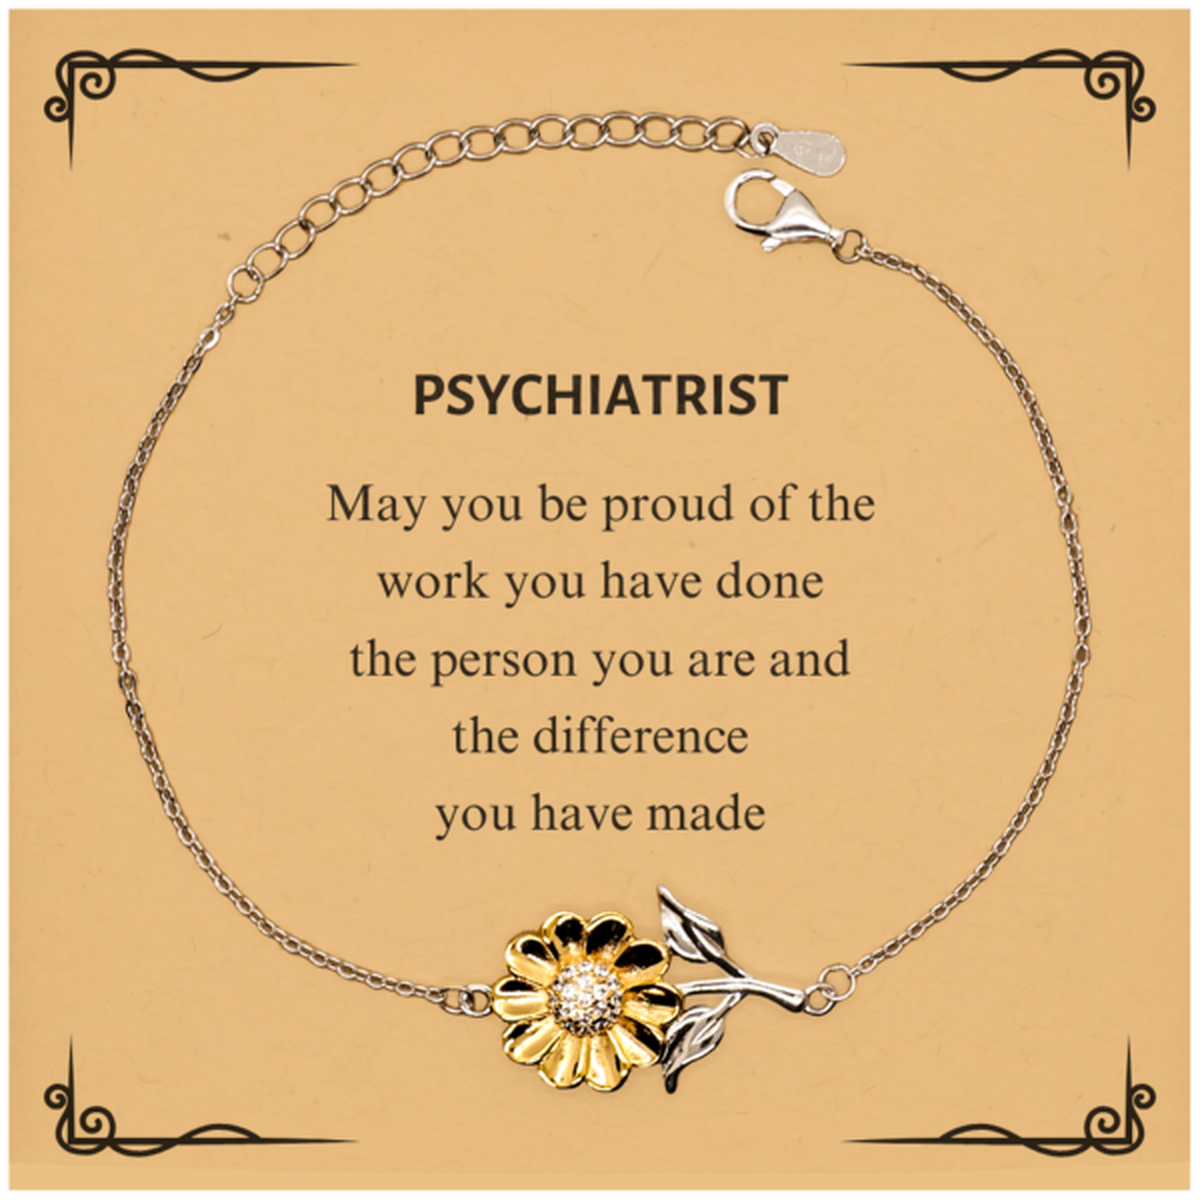 Psychiatrist May you be proud of the work you have done, Retirement Psychiatrist Sunflower Bracelet for Colleague Appreciation Gifts Amazing for Psychiatrist